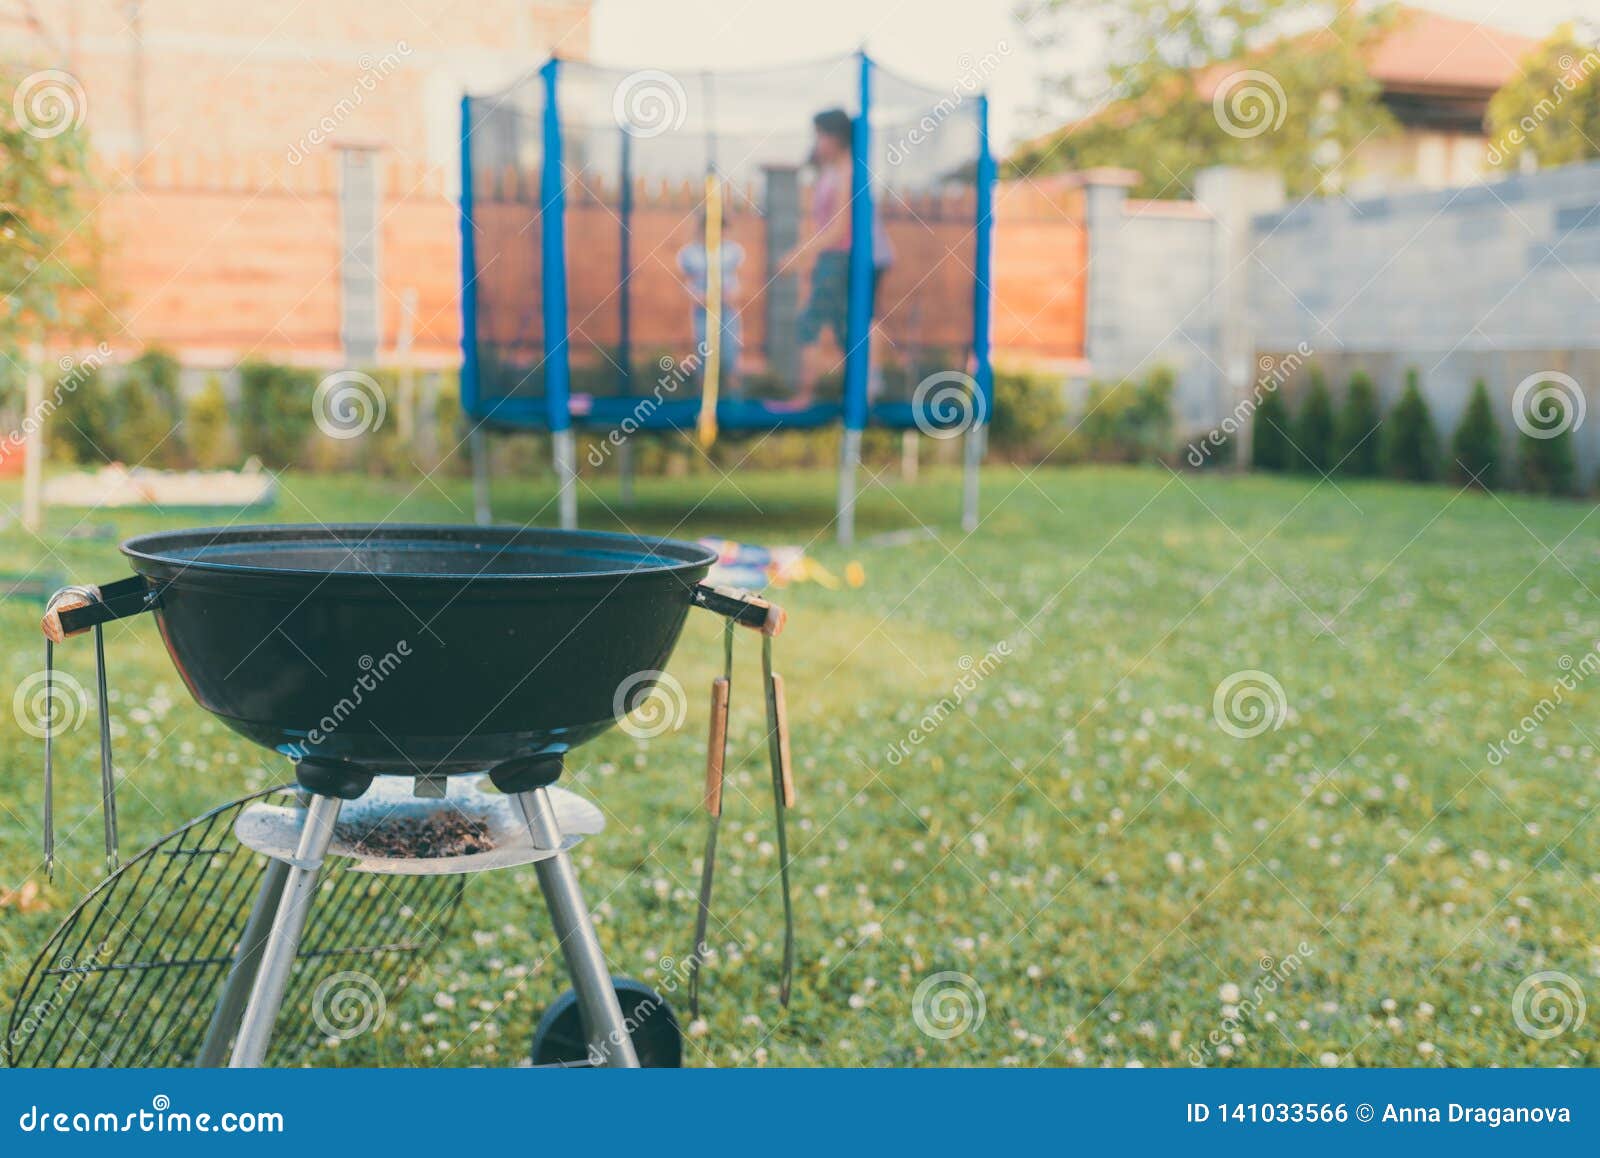 Kettle Charcoal Bbq Barbecue Grill In Garden Or Backyard Blurred Outdoor Trampoline In The Background Family Home Stock Photo Image Of Cookout Burgers 141033566